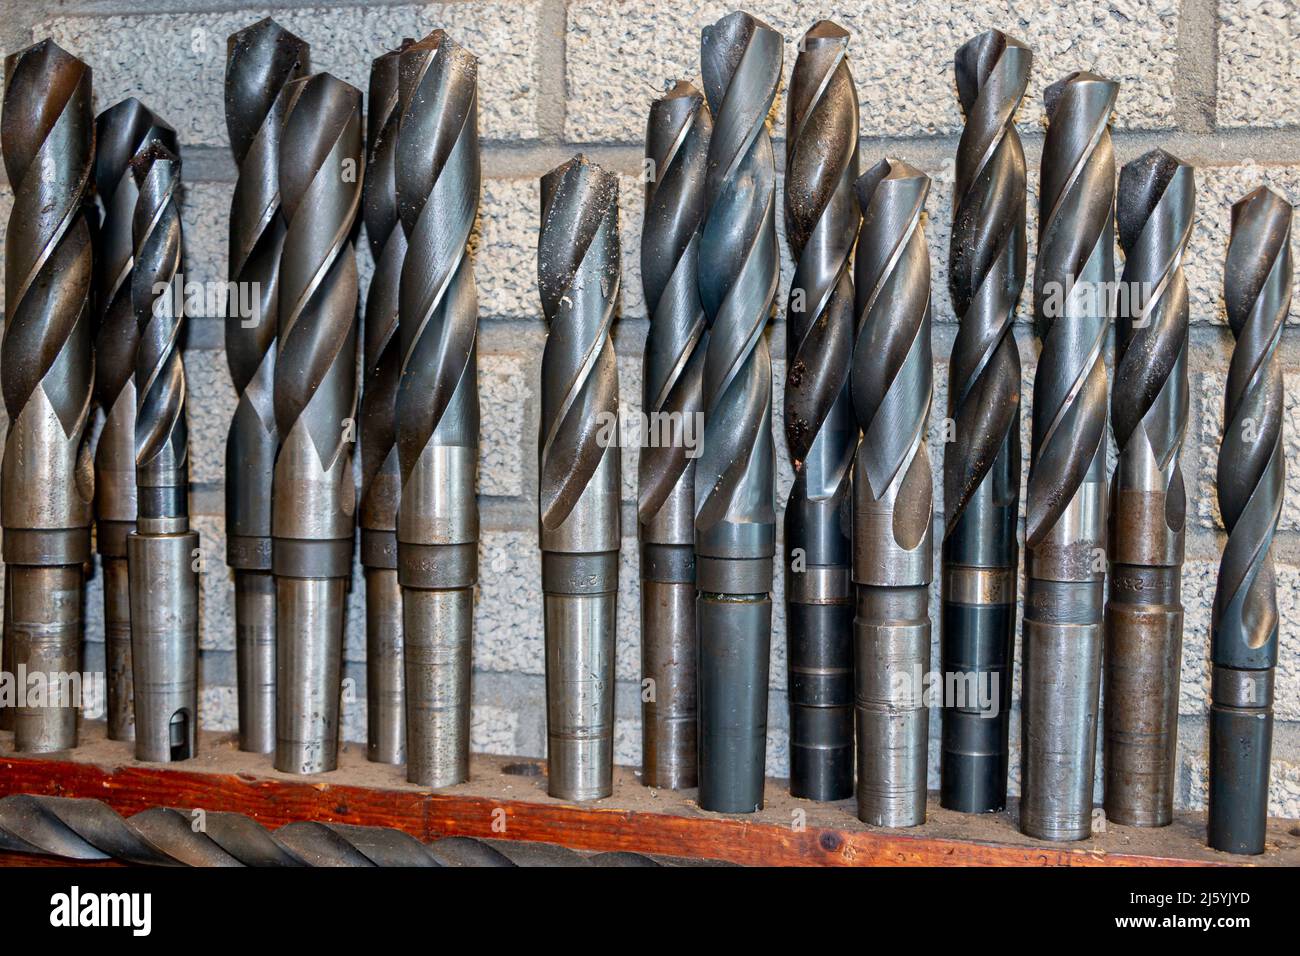 Industrial metal drills in a drill stand for drilling holes in steel and iron material Stock Photo